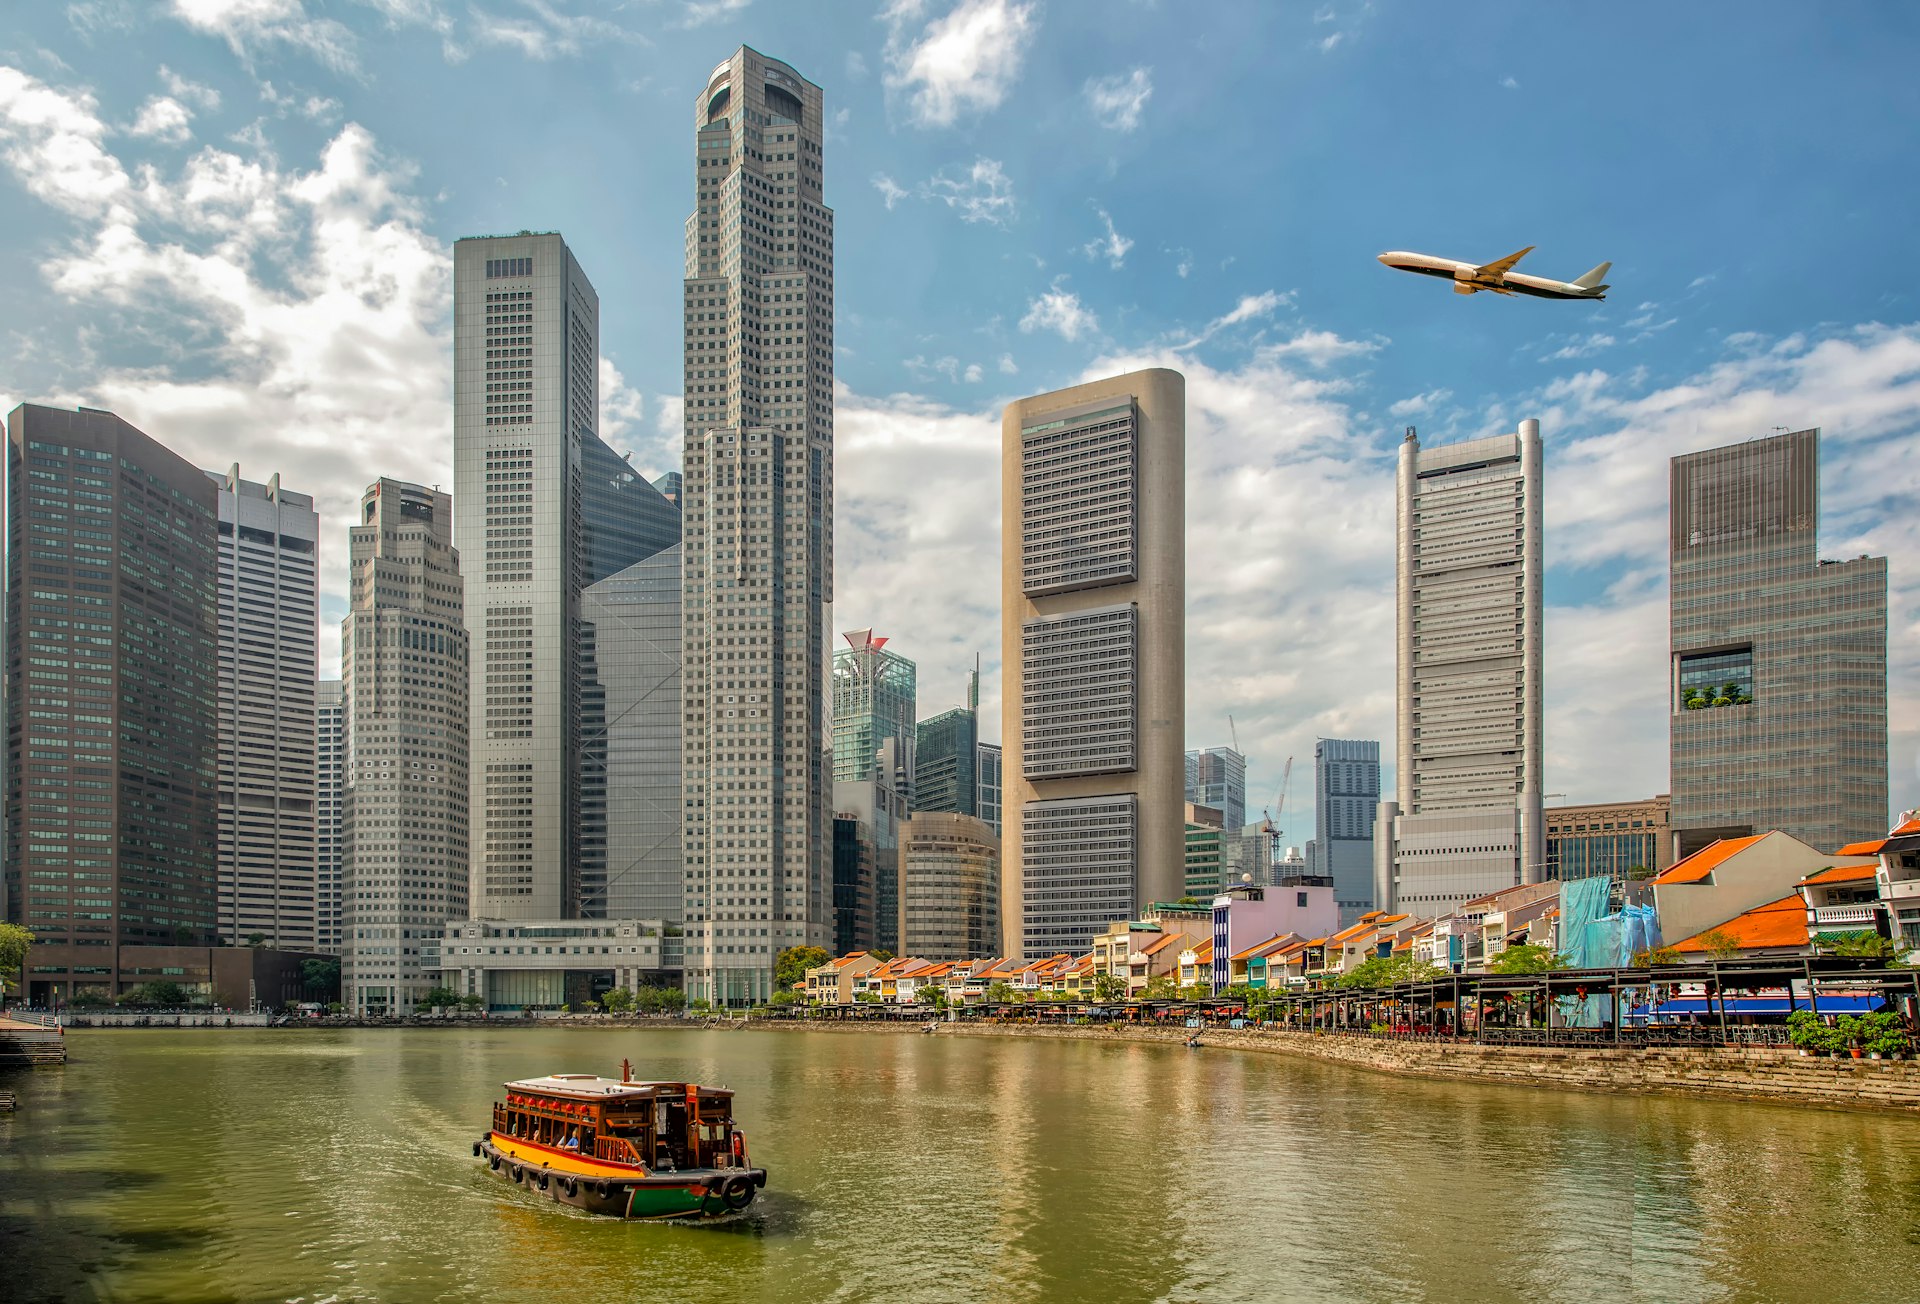 A plane flies over downtown Singapore's skyline with a ferry on the river below